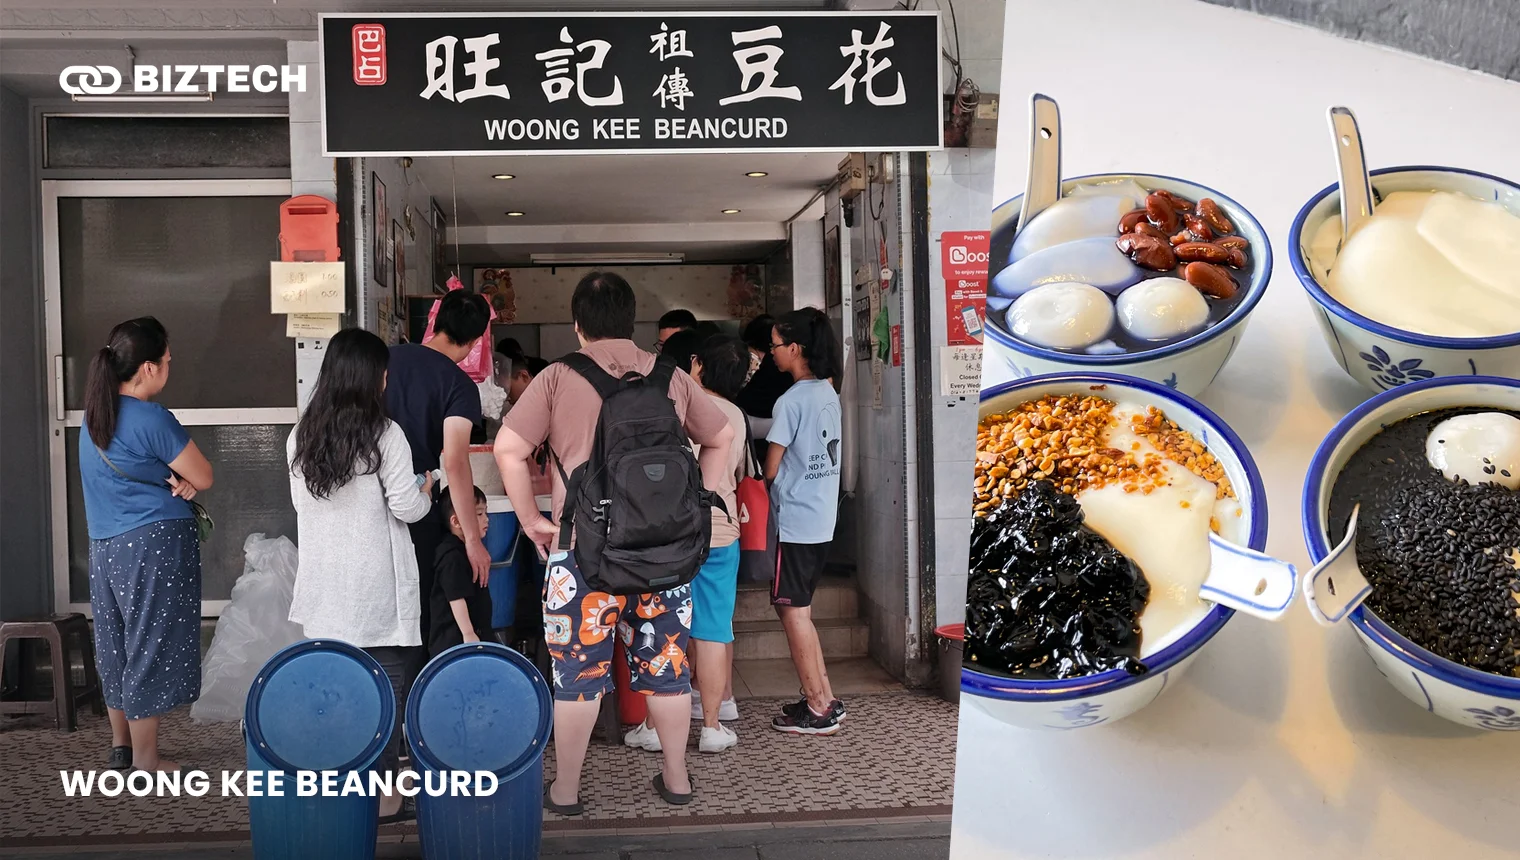 Woong Kee Beancurd